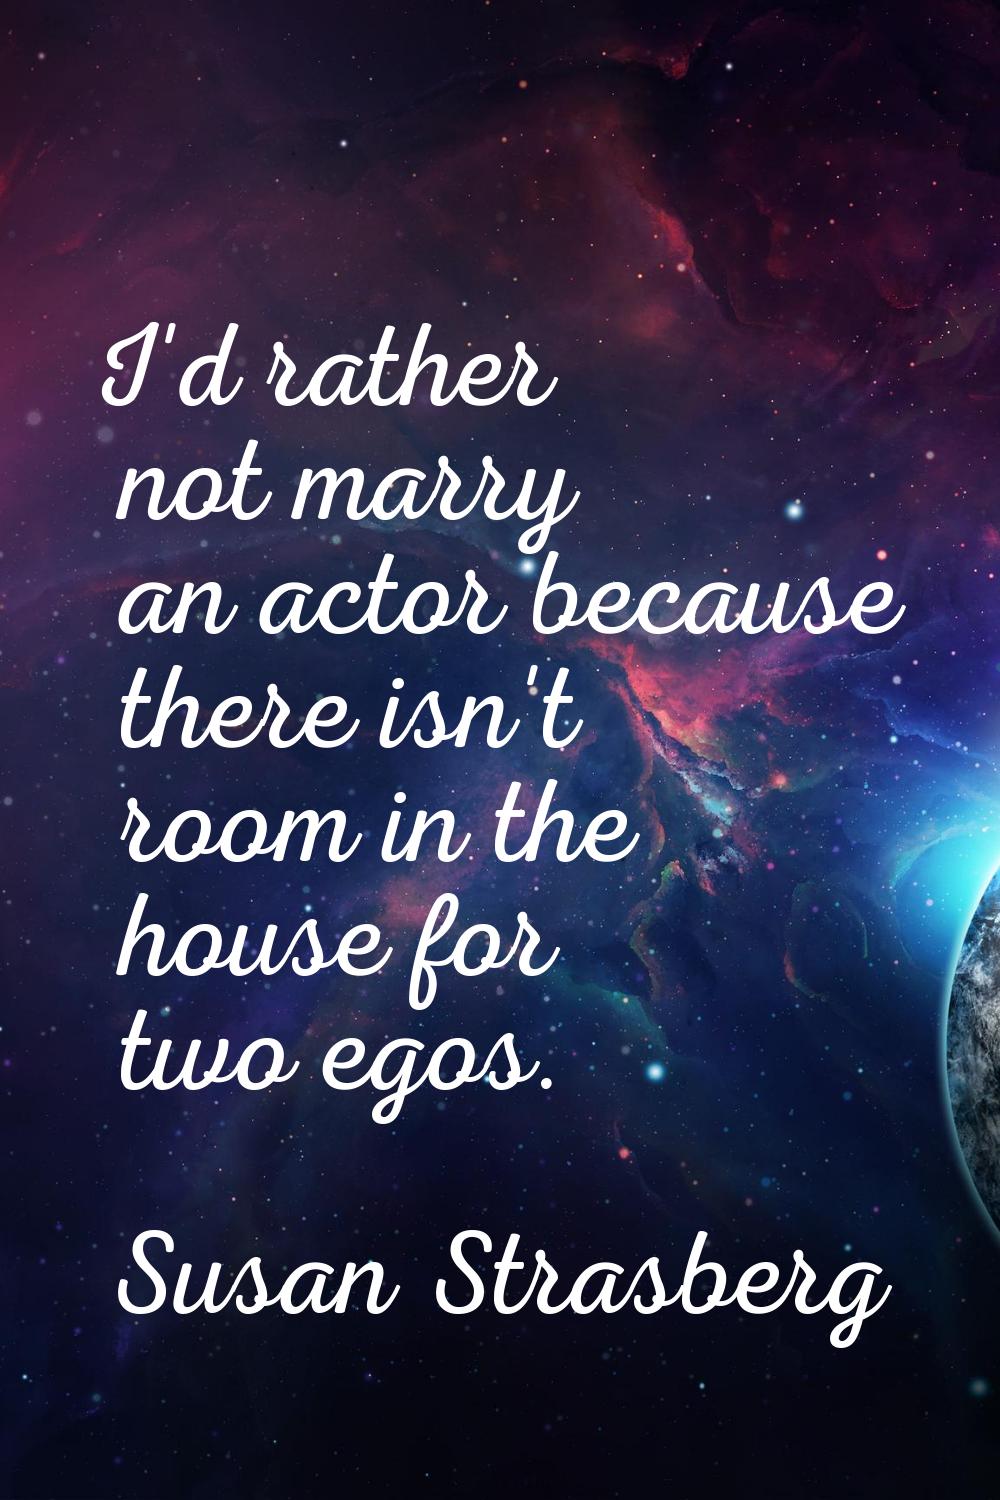 I'd rather not marry an actor because there isn't room in the house for two egos.